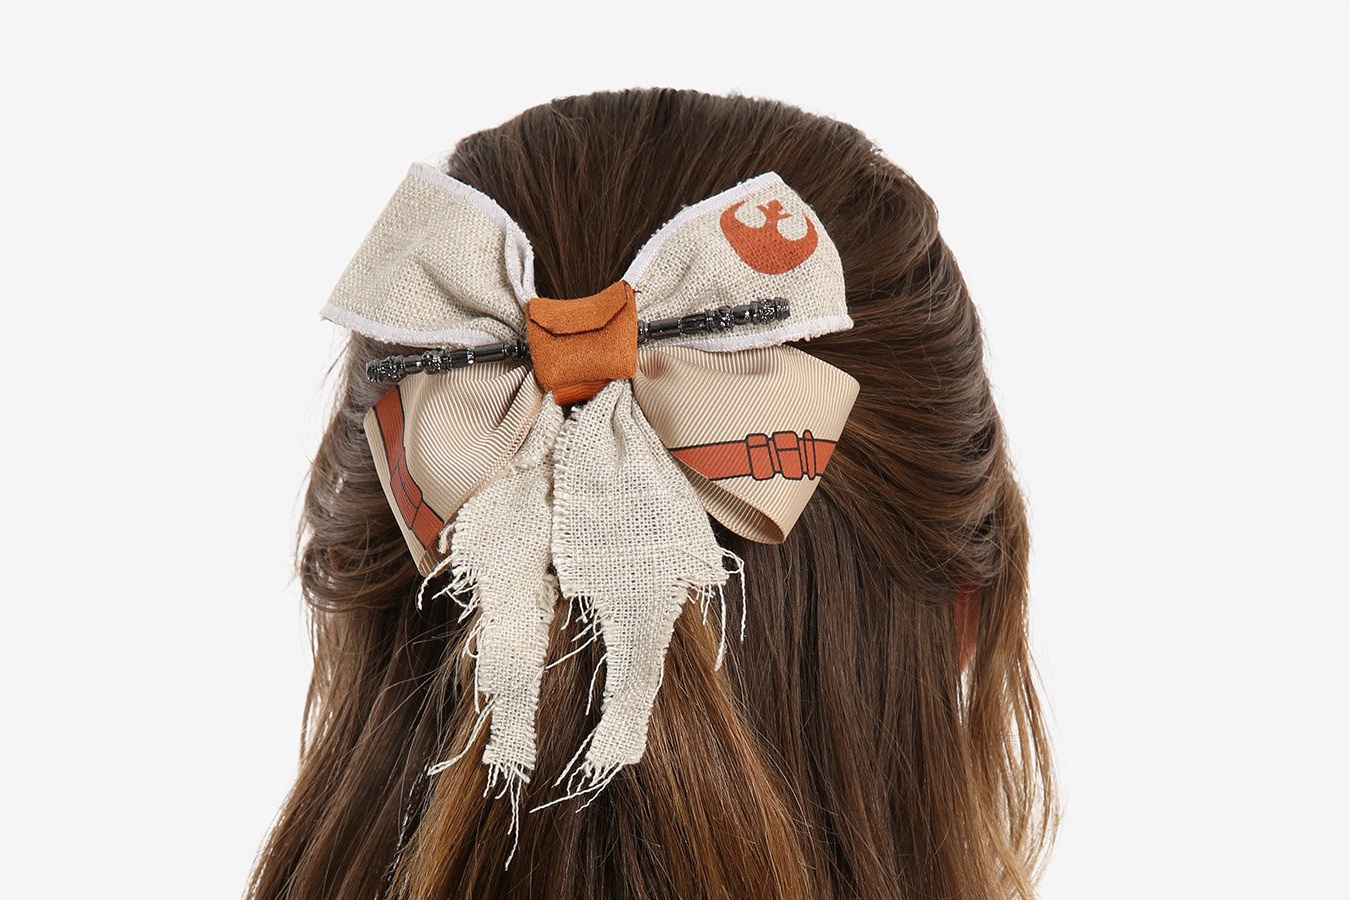 New Rey Hair Bow at Box Lunch